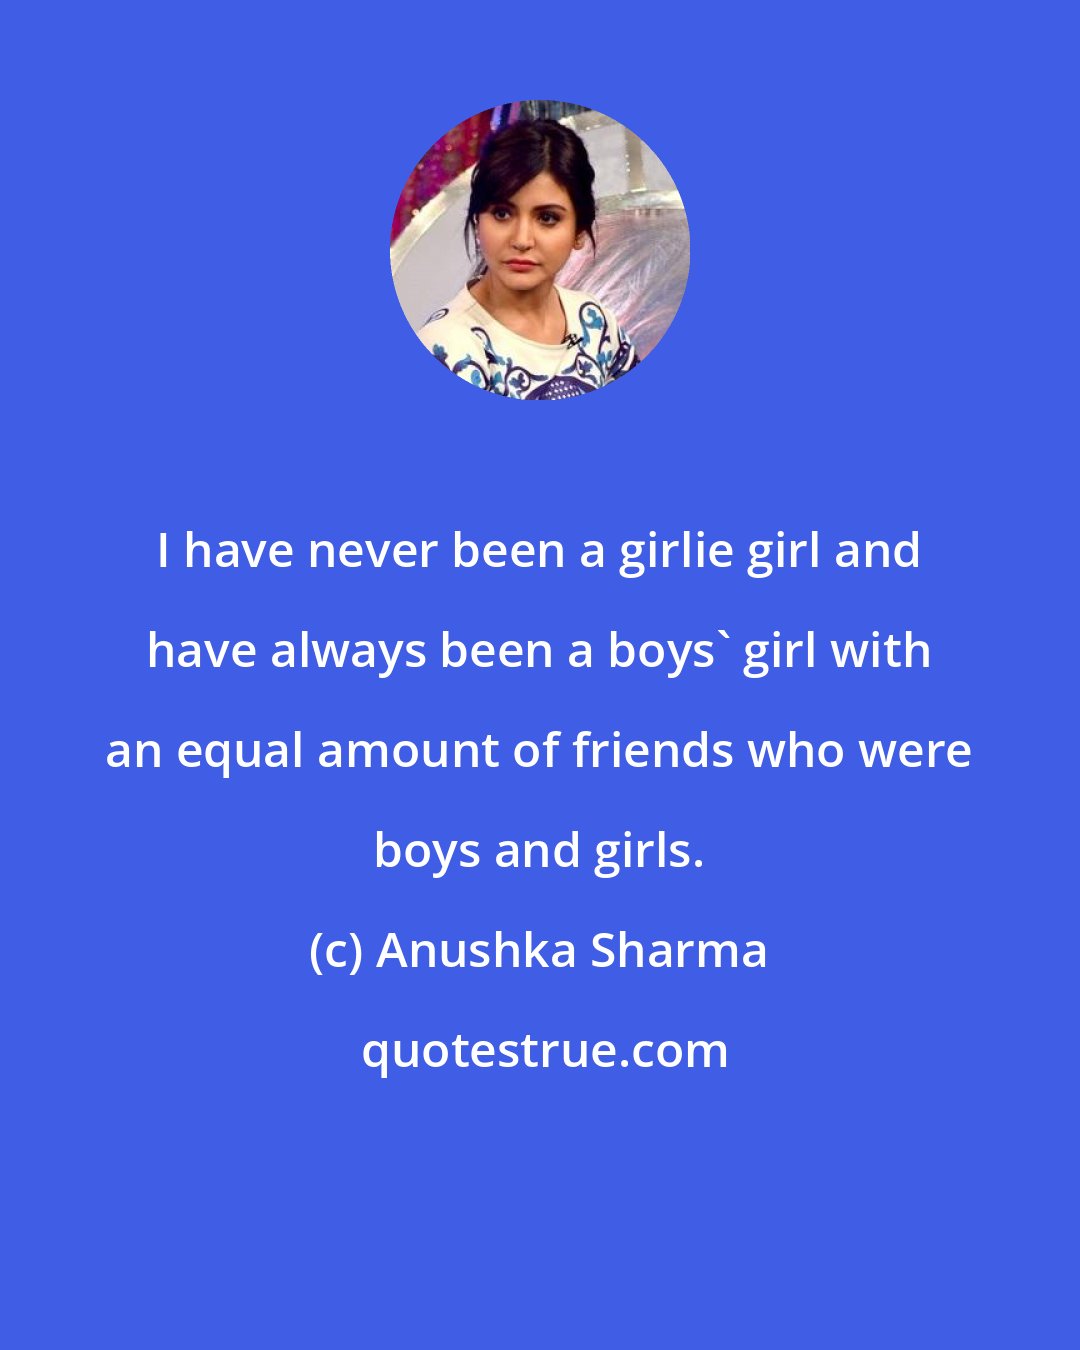 Anushka Sharma: I have never been a girlie girl and have always been a boys' girl with an equal amount of friends who were boys and girls.